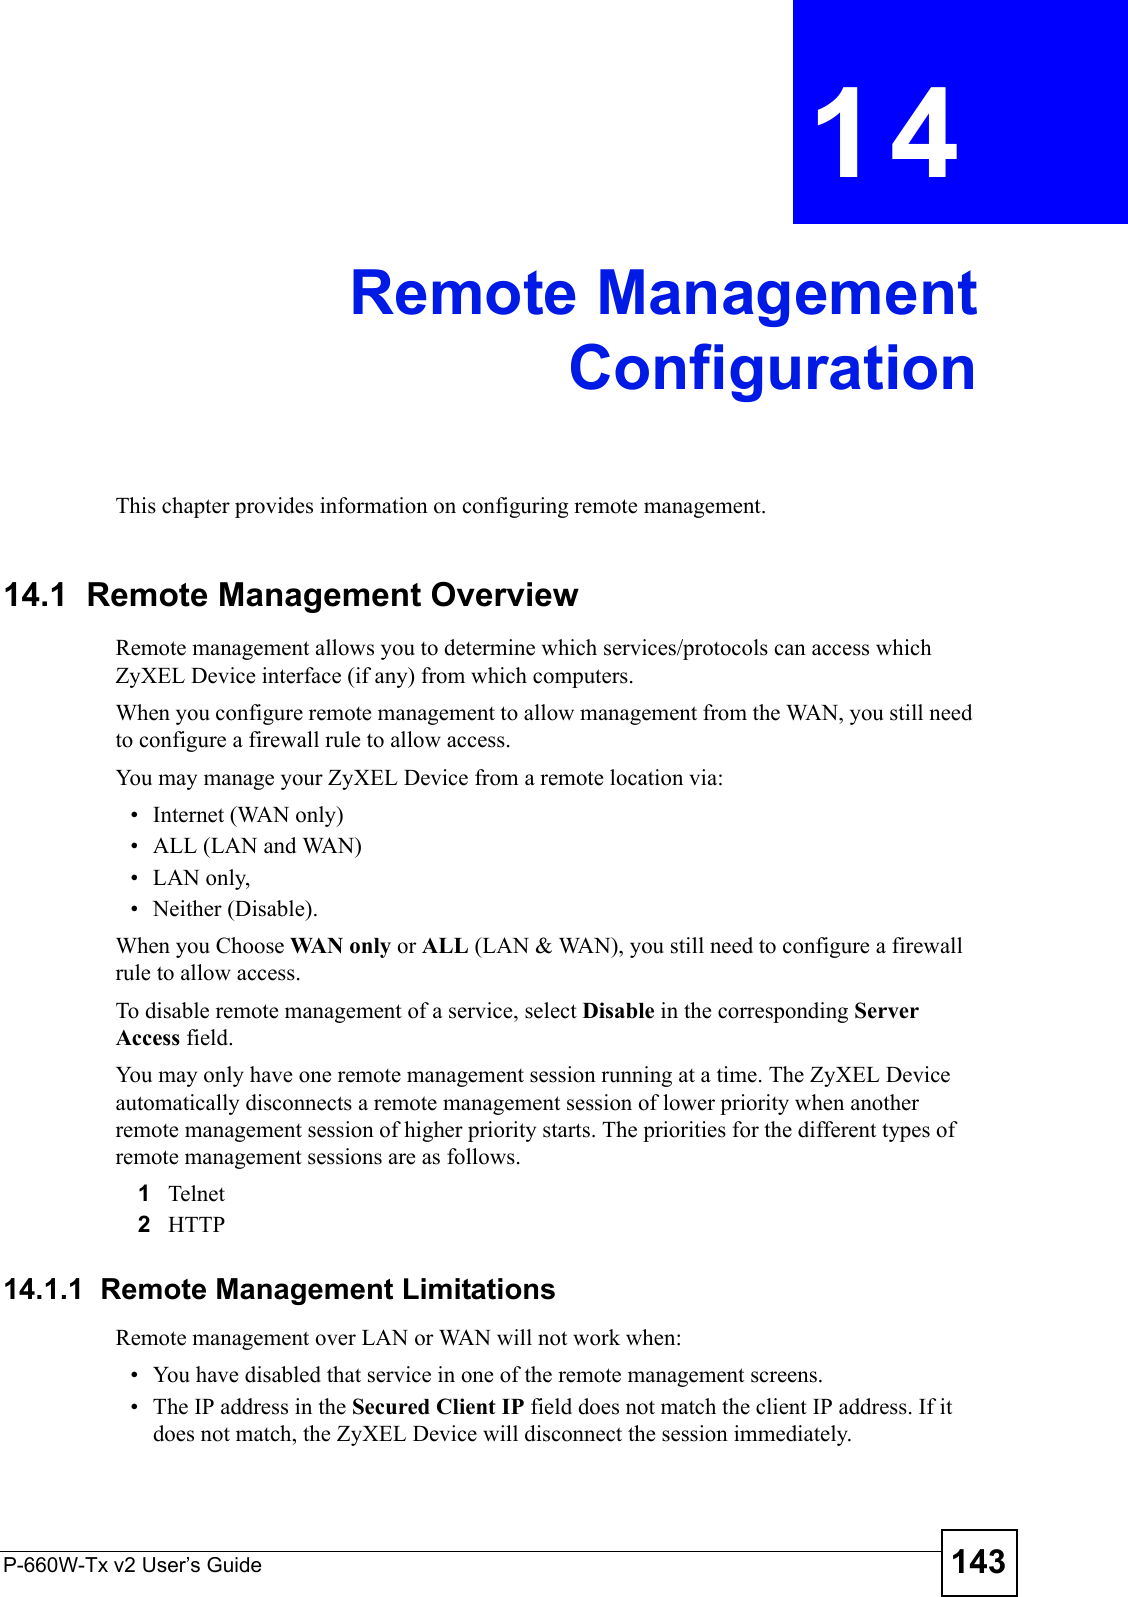 P-660W-Tx v2 User’s Guide 143CHAPTER  14 Remote ManagementConfigurationThis chapter provides information on configuring remote management.14.1  Remote Management Overview Remote management allows you to determine which services/protocols can access which ZyXEL Device interface (if any) from which computers.When you configure remote management to allow management from the WAN, you still need to configure a firewall rule to allow access.You may manage your ZyXEL Device from a remote location via:• Internet (WAN only)• ALL (LAN and WAN)• LAN only, • Neither (Disable).When you Choose WAN  o nl y or ALL (LAN &amp; WAN), you still need to configure a firewall rule to allow access.To disable remote management of a service, select Disable in the corresponding Server Access field.You may only have one remote management session running at a time. The ZyXEL Device automatically disconnects a remote management session of lower priority when another remote management session of higher priority starts. The priorities for the different types of remote management sessions are as follows.1Telnet2HTTP14.1.1  Remote Management LimitationsRemote management over LAN or WAN will not work when:• You have disabled that service in one of the remote management screens.• The IP address in the Secured Client IP field does not match the client IP address. If it does not match, the ZyXEL Device will disconnect the session immediately.